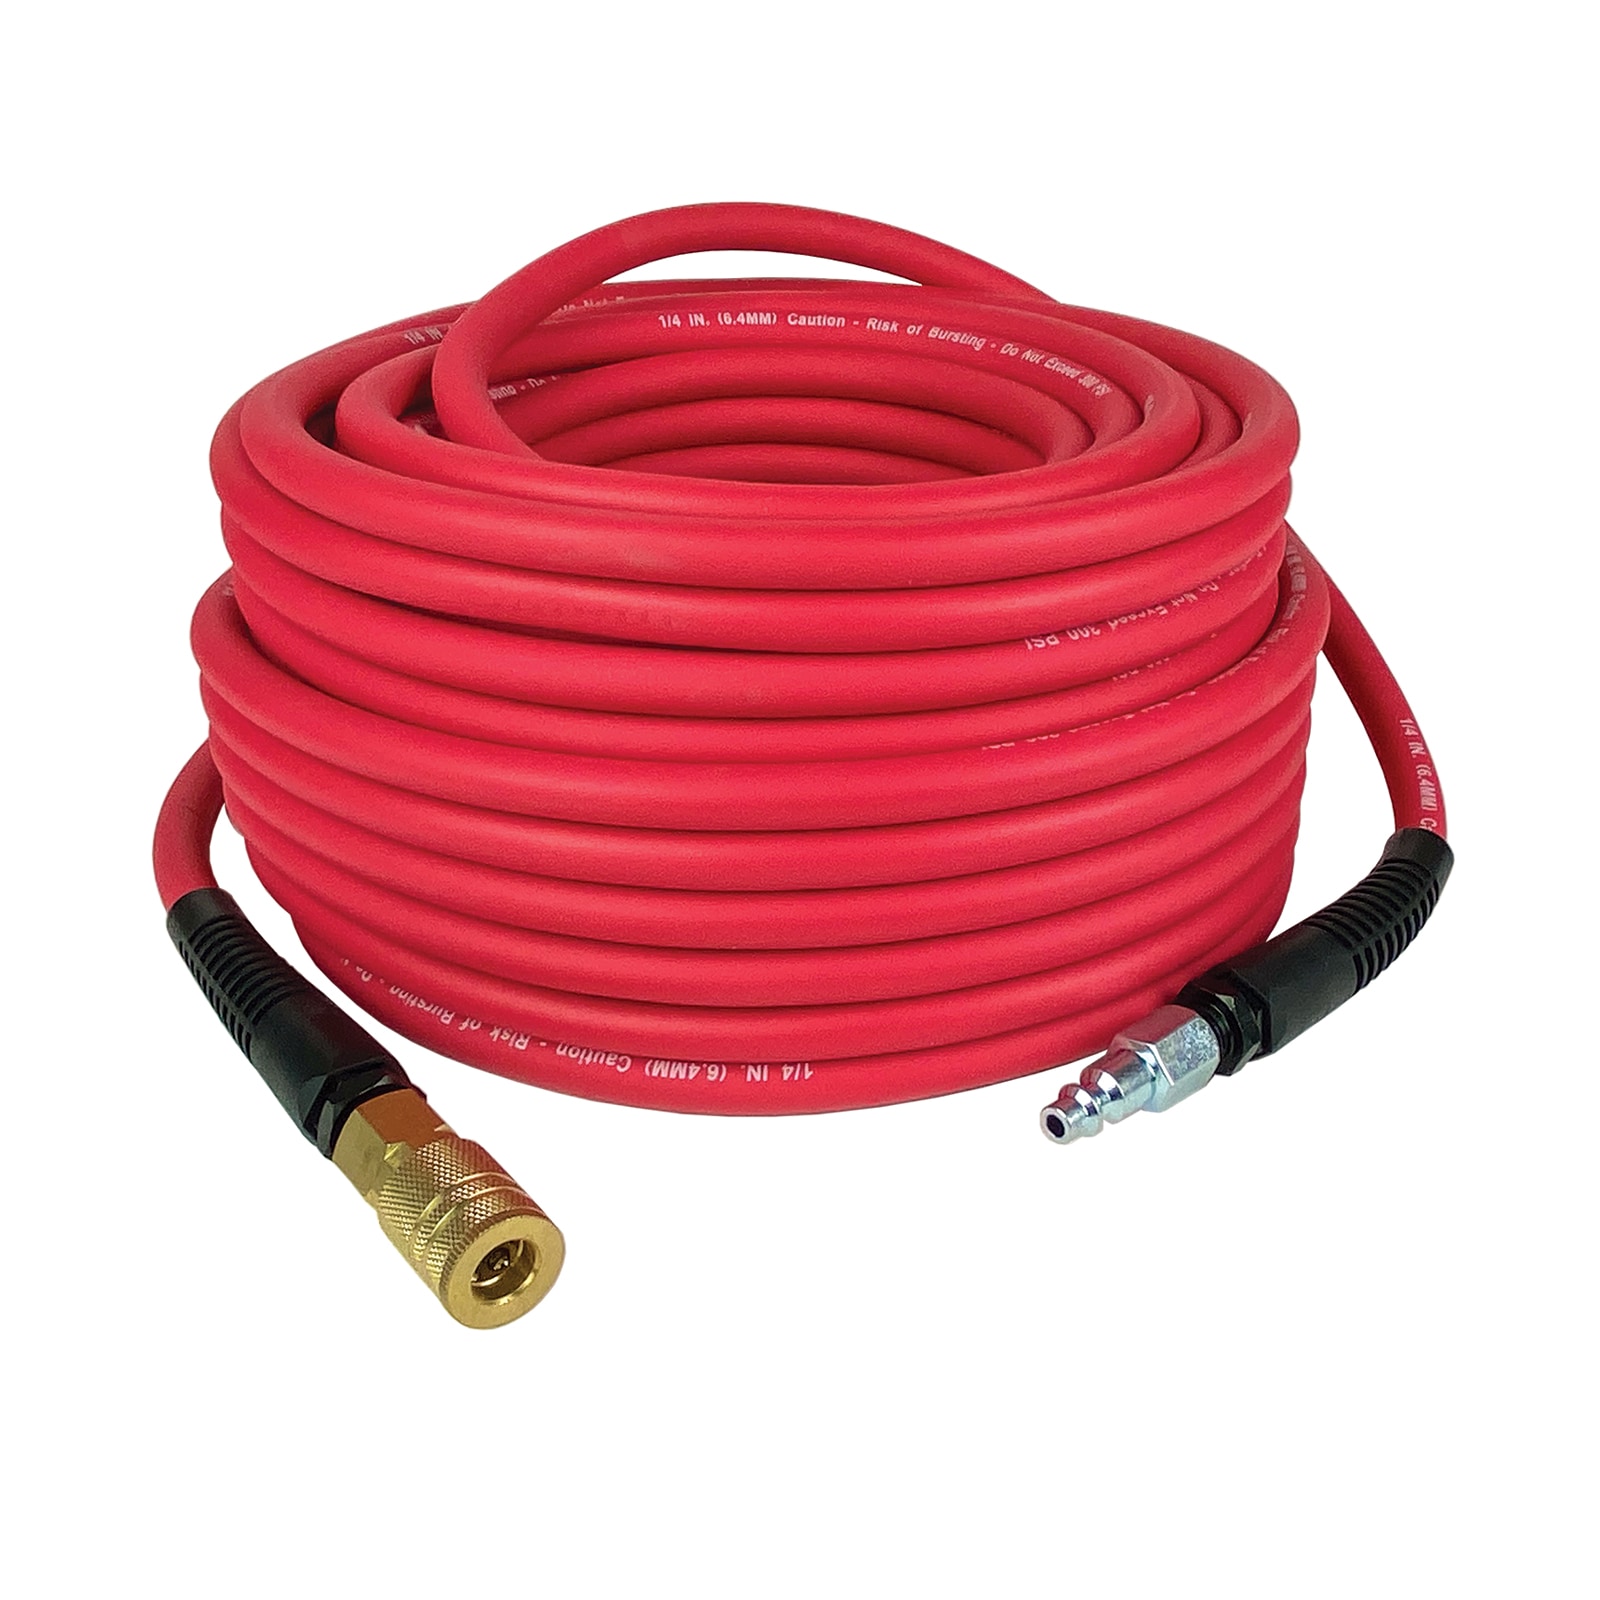 Primefit 1/4 x 100ft Extreme Performance Hybrid Air Hose with Coupler and Plug | HYP141002C-R